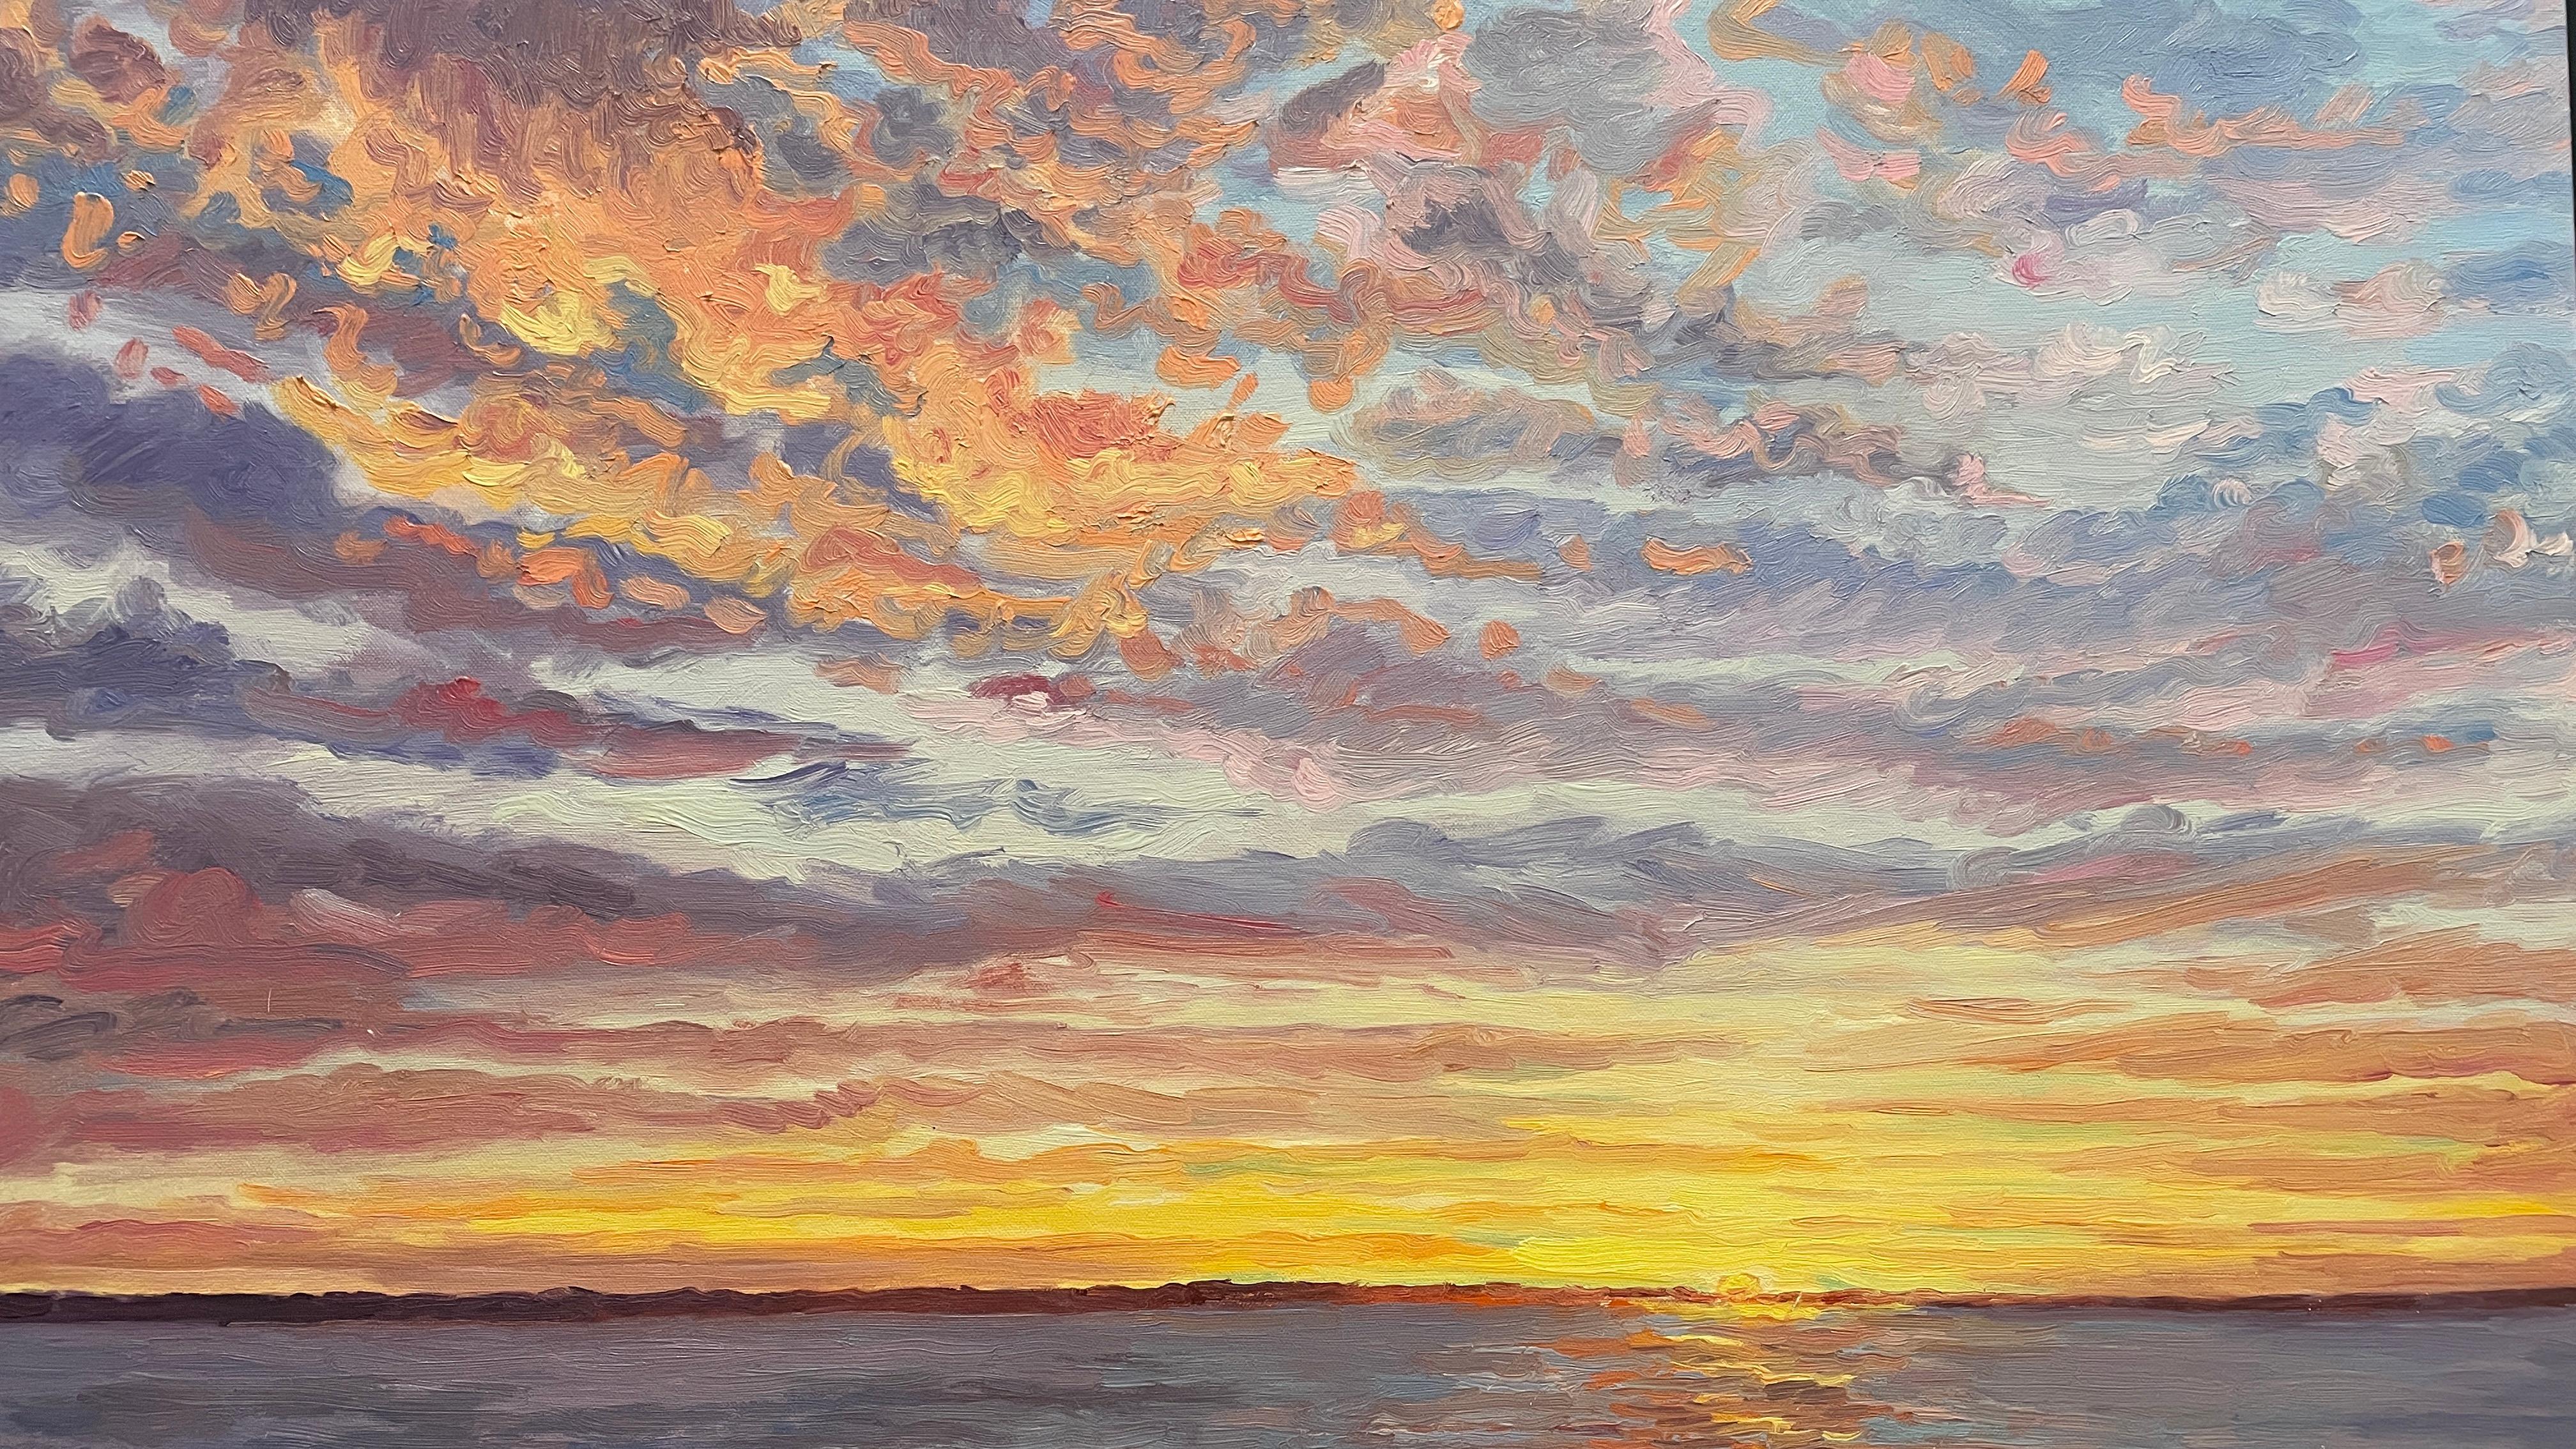 Carl Scorza Landscape Painting - Nature's Glory at End of Day. Title - Sunset over Gardiners Bay